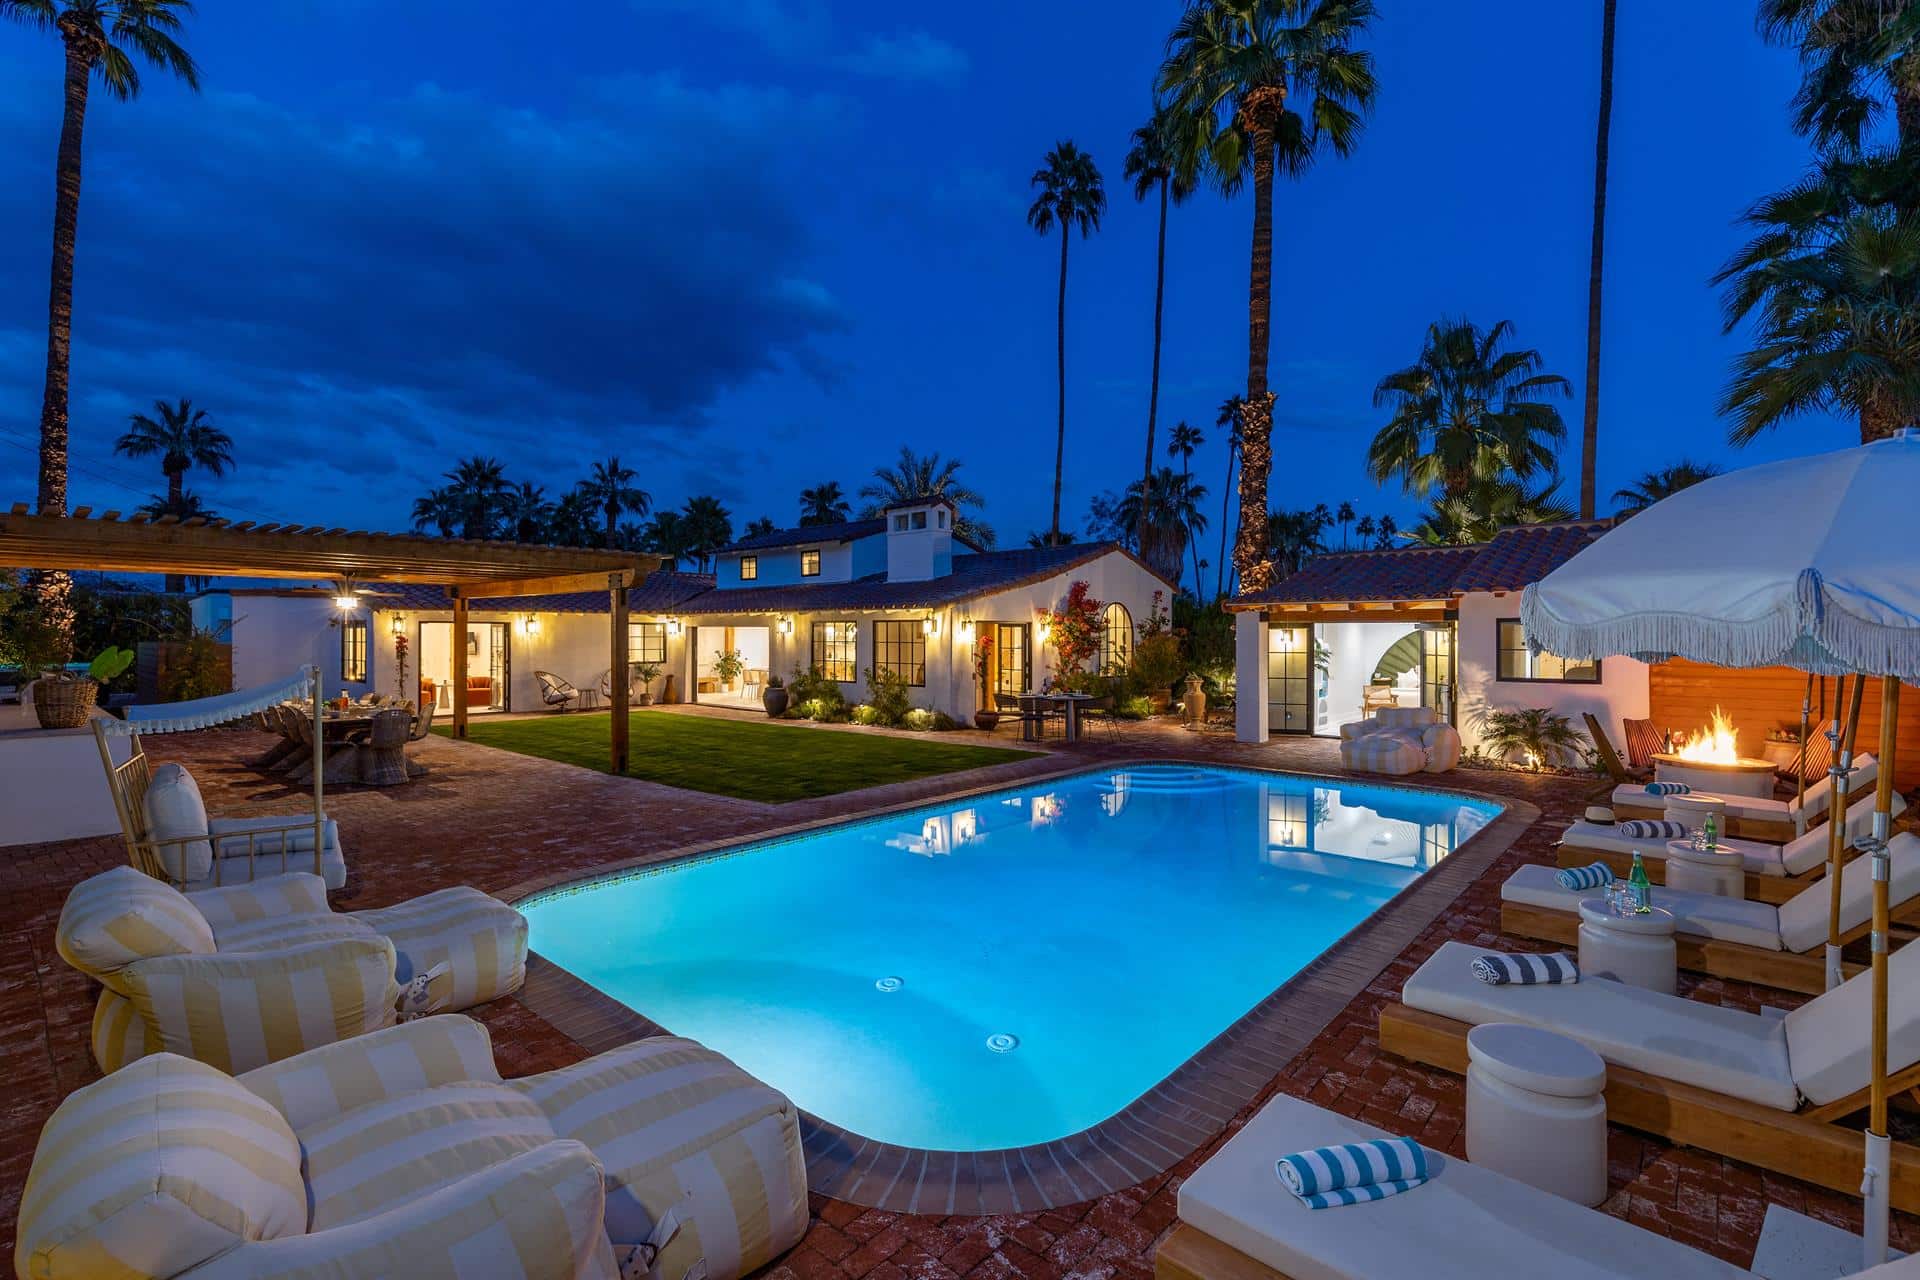 An illuminated luxury backyard with an in-ground swimming pool at twilight, featuring an outdoor lounge area with a fire pit, cushioned chairs, and a covered patio adjacent to a white two-story house surrounded by tall palm trees.